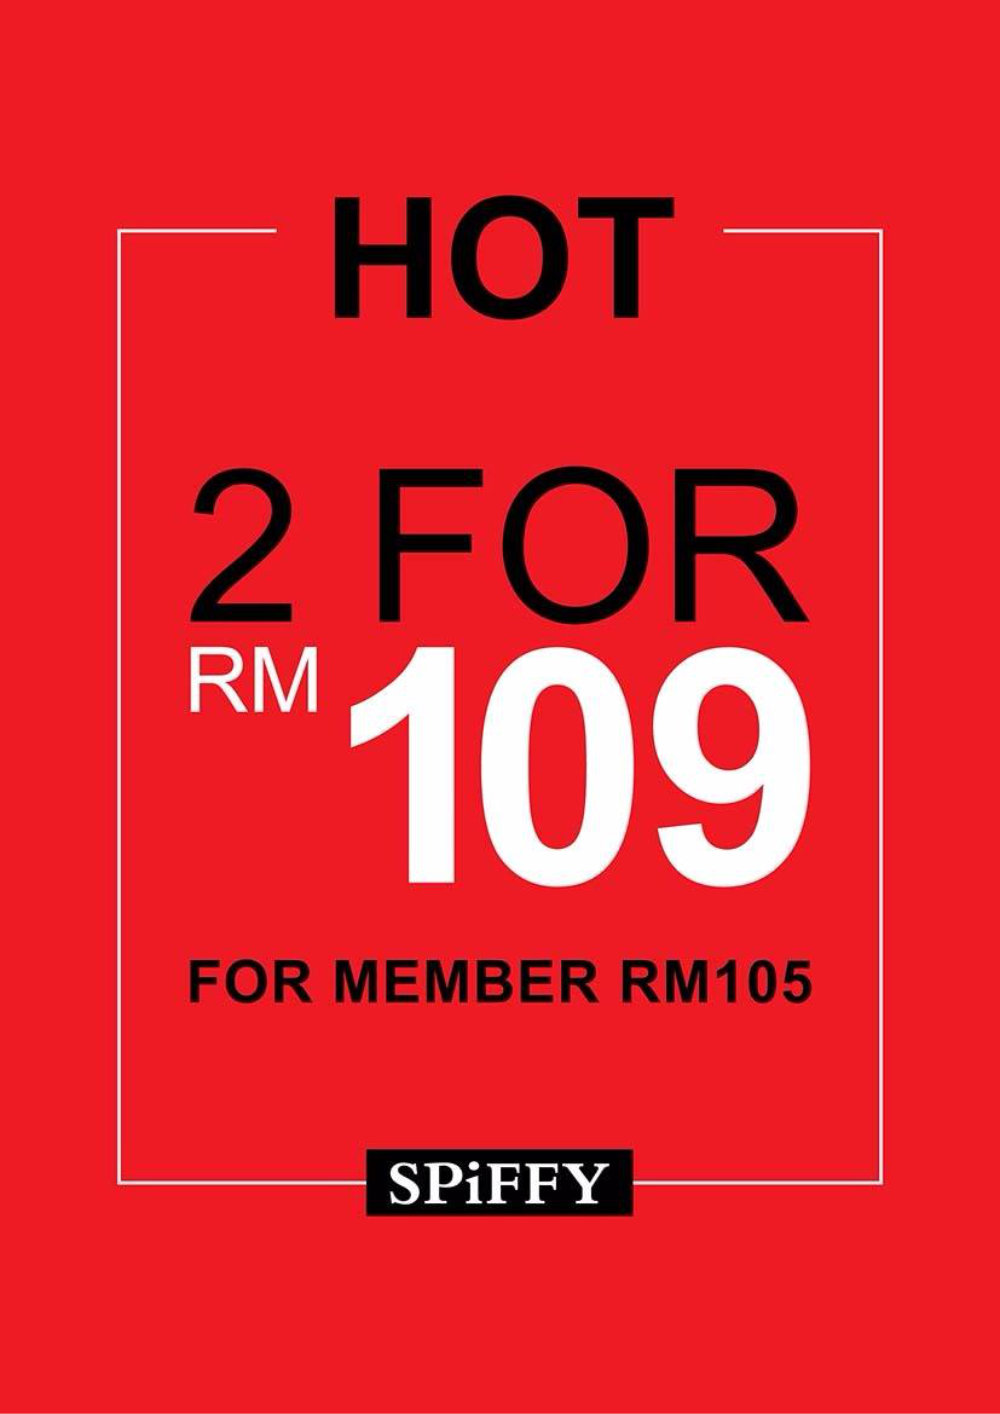 Spiffy Shoes Sales Malaysia for With You Club Members 2 pairs of shoes RM109 only Spiffy Shoes A01.jpg